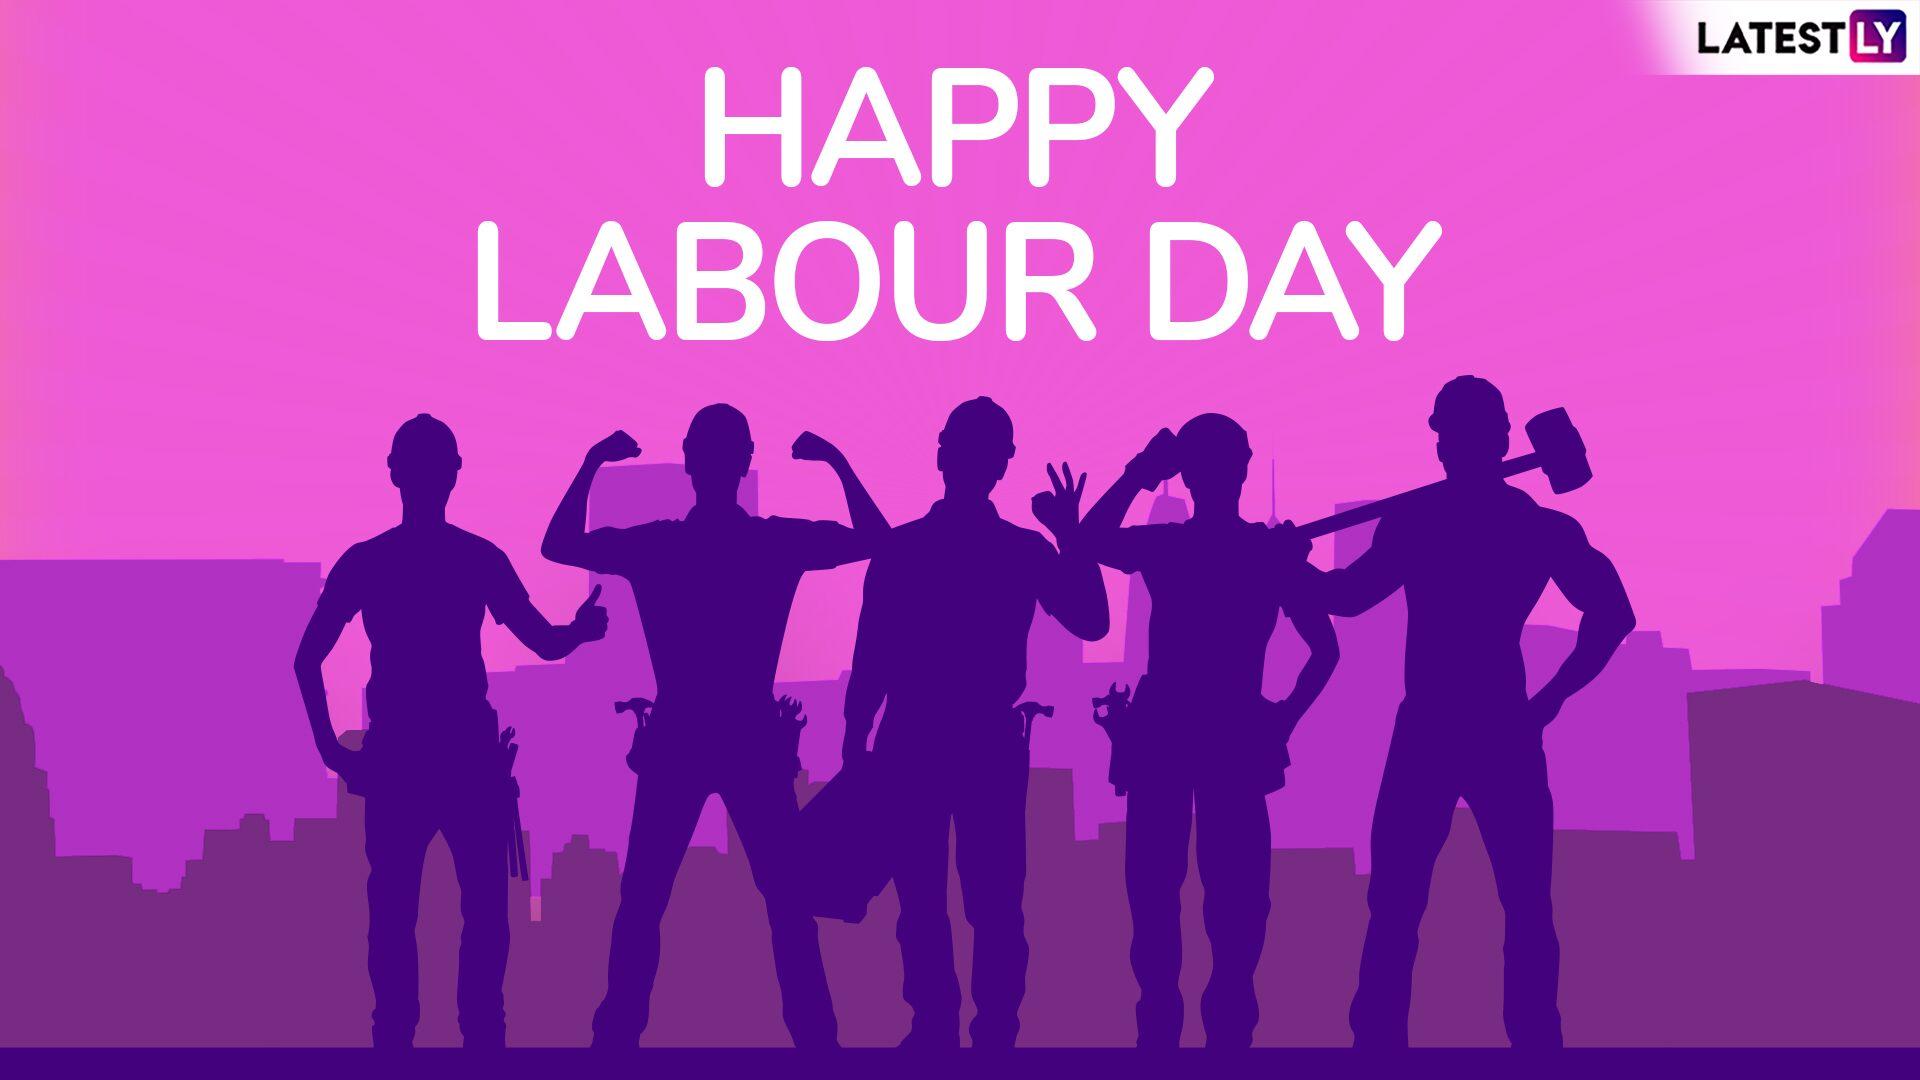 Labour Day Image With Quotes & HD Wallpaper for Free Download